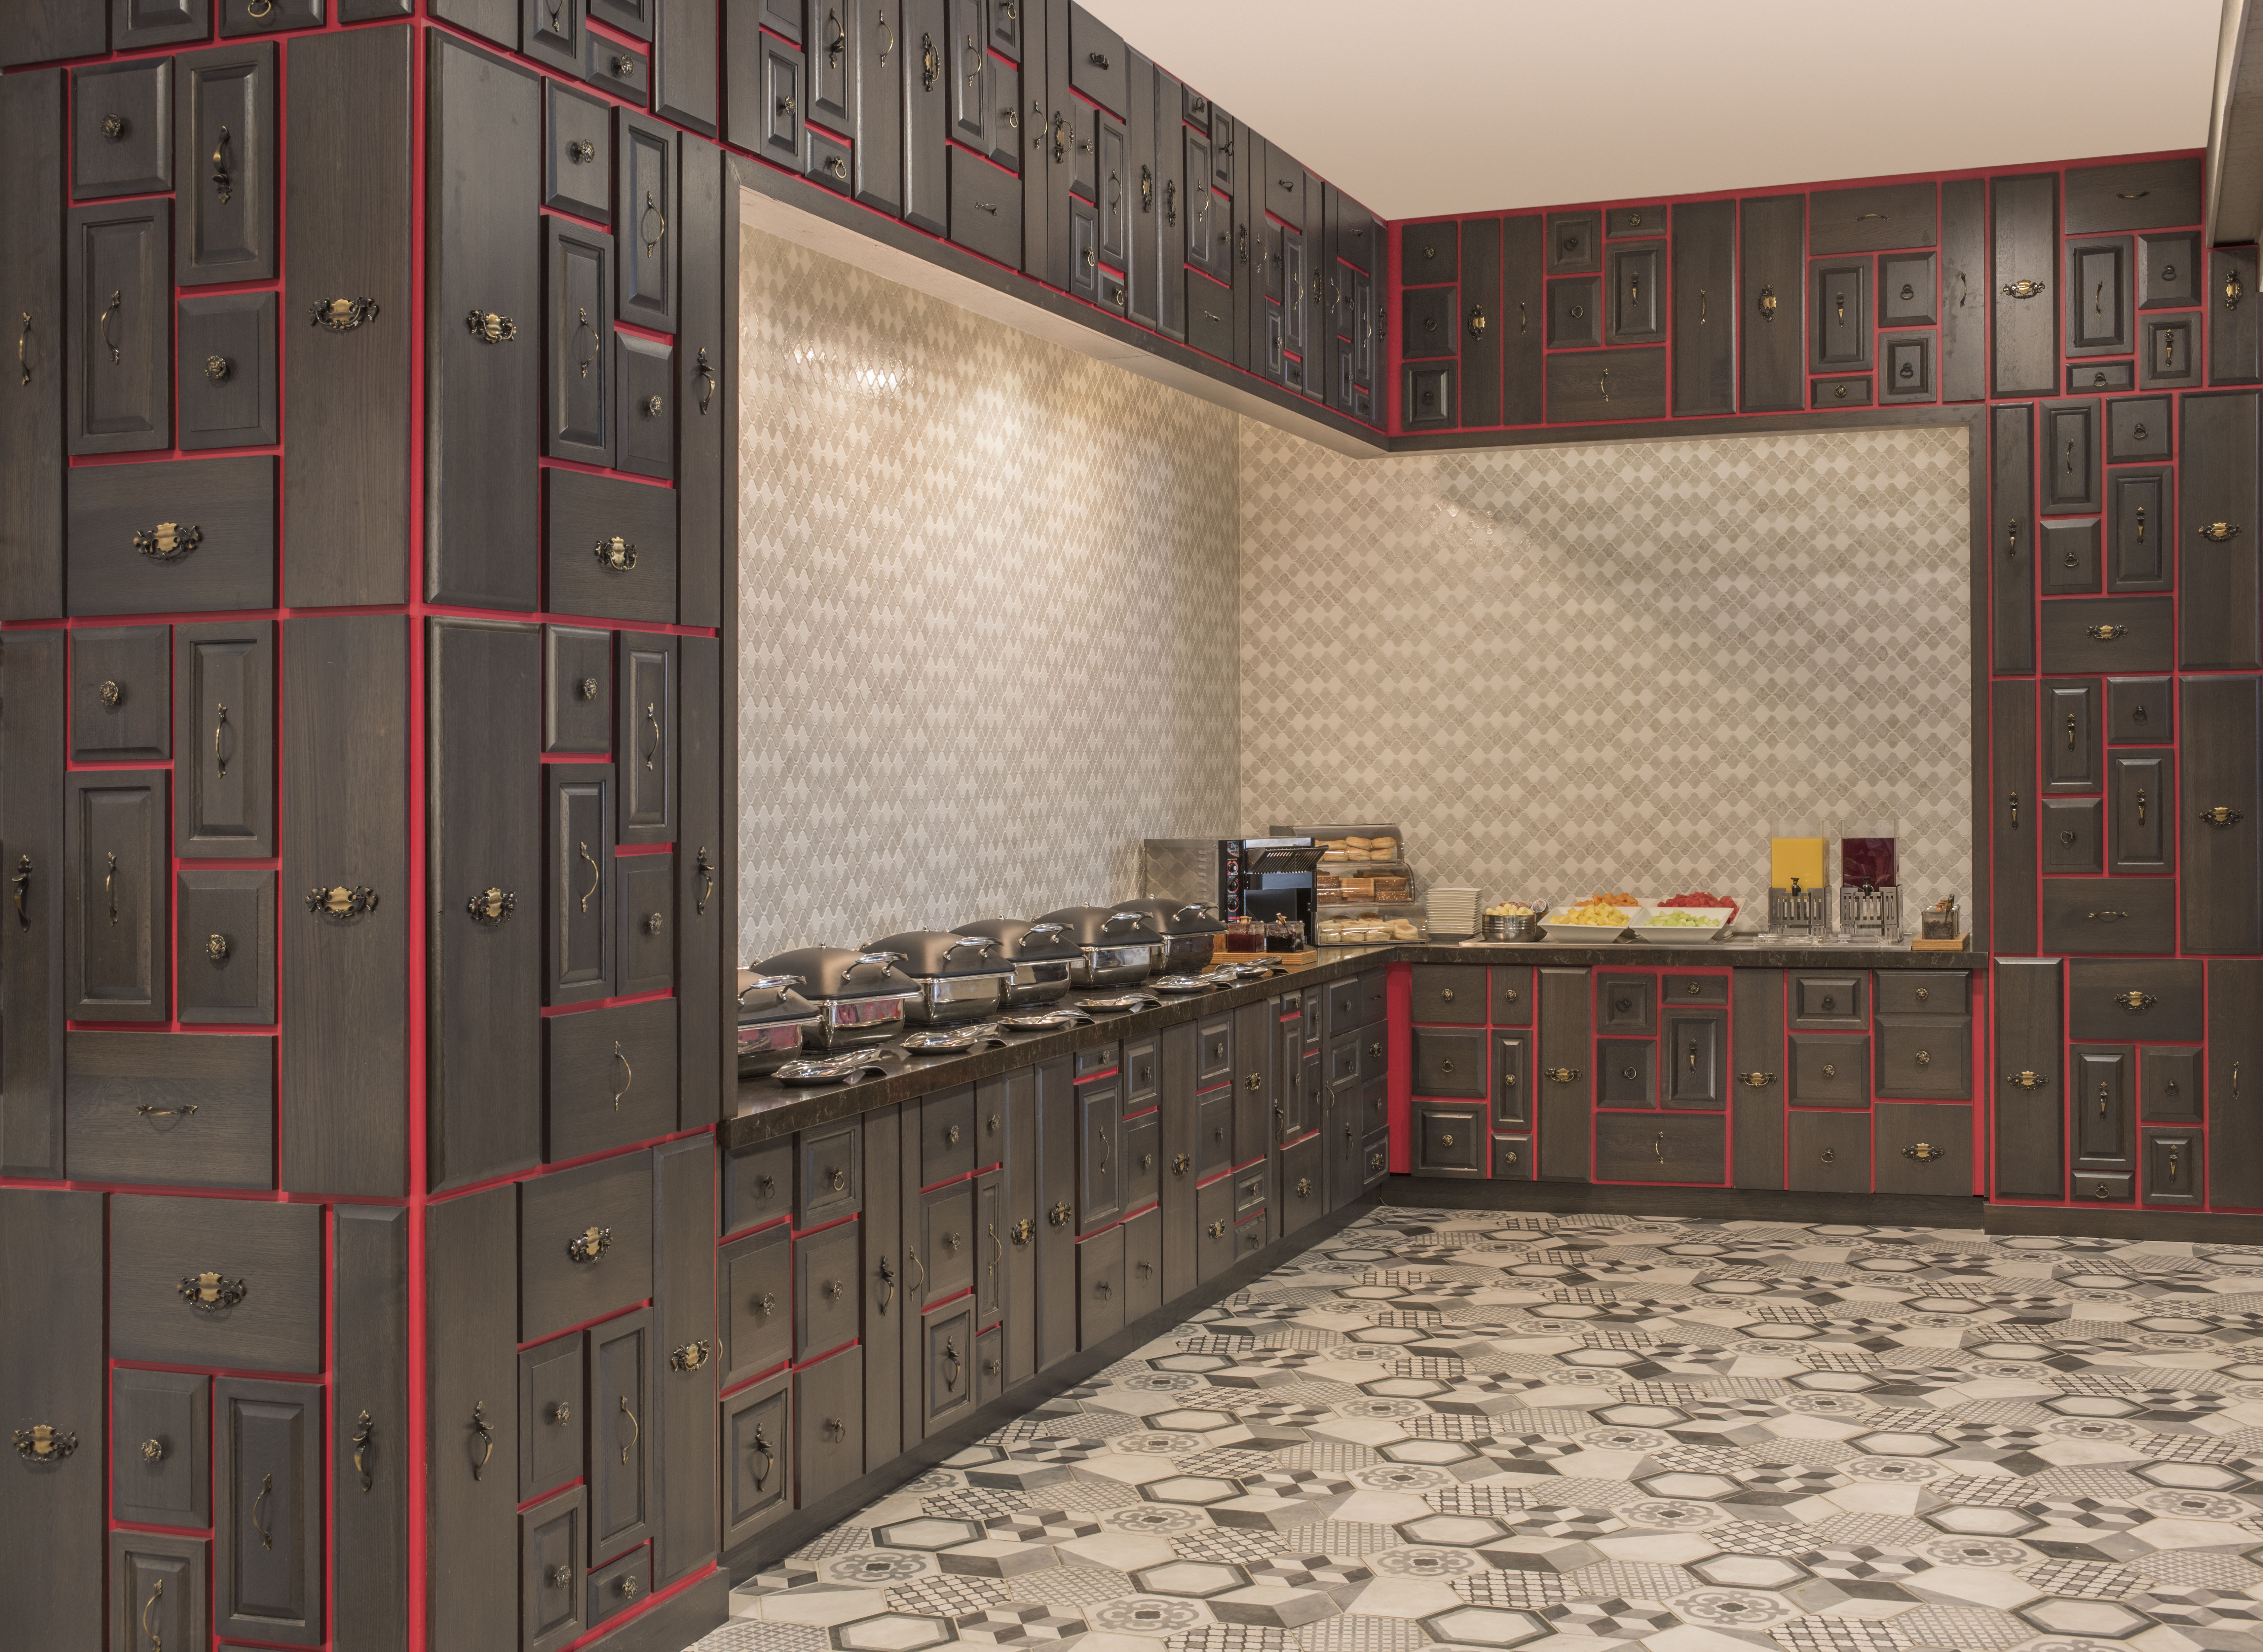 Wood Cabinets With Red Trim Surrounding Hot and Cold Breakfast Buffet in Texture Food & Drink